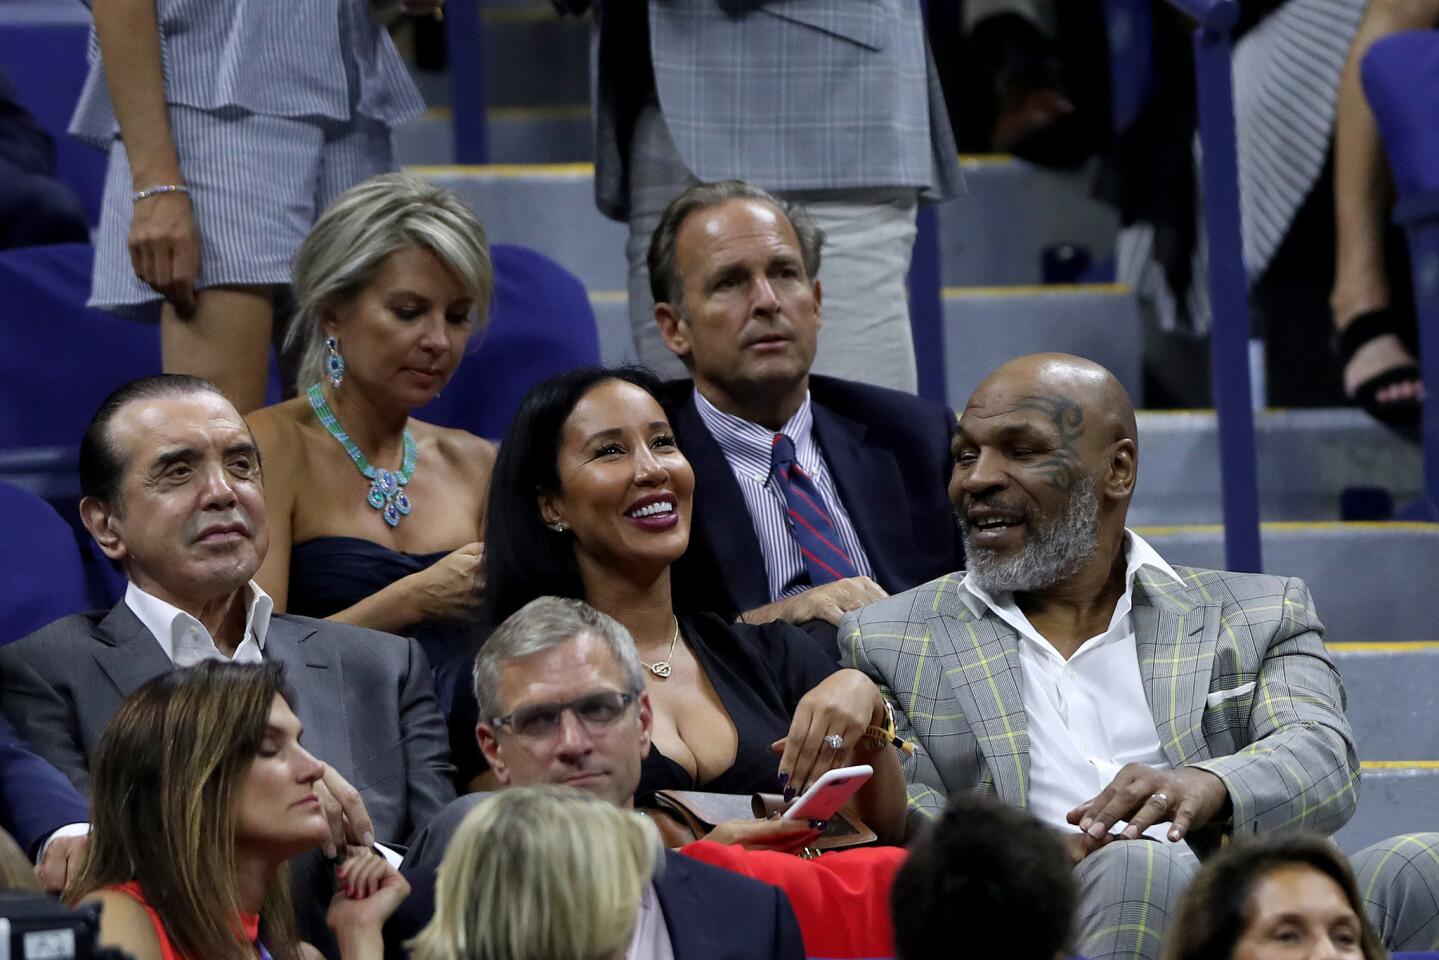 (L-R) Actor Chazz Palminteri,left, Lakiha Spicer (Mike Tyson's wife) and Mike Tyson attend the Women's Singles first-round match at the 2019 U.S. Open at the USTA Billie Jean King National Tennis Center on Aug. 26, 2019, in Flushing, Queens.